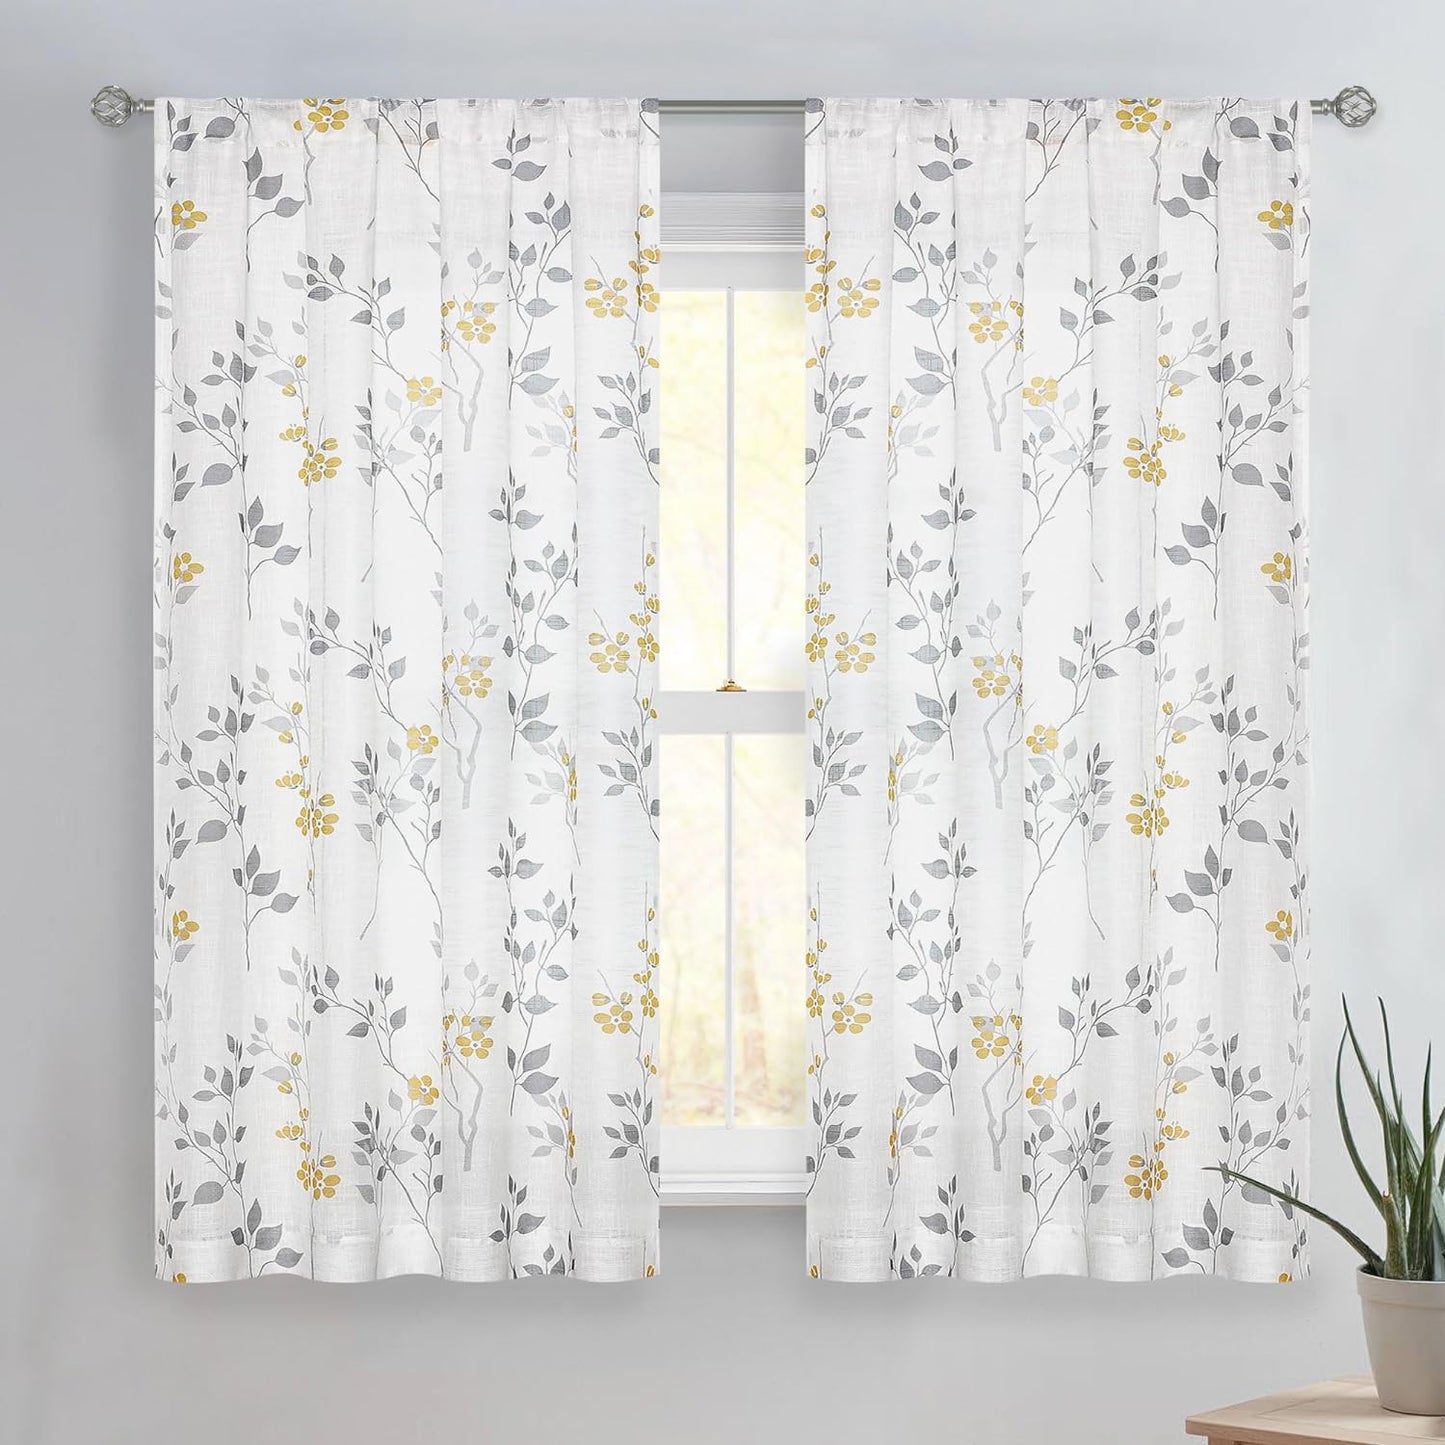 Beauoop Floral Semi Sheer Curtains 84 Inch Long for Living Room Bedroom Farmhouse Botanical Leaf Printed Rustic Linen Texture Panel Drapes Rod Pocket Window Treatment,2 Panels,50 Wide,Yellow/Gray  Beauoop Yellow/Gray 50"X54"X2 